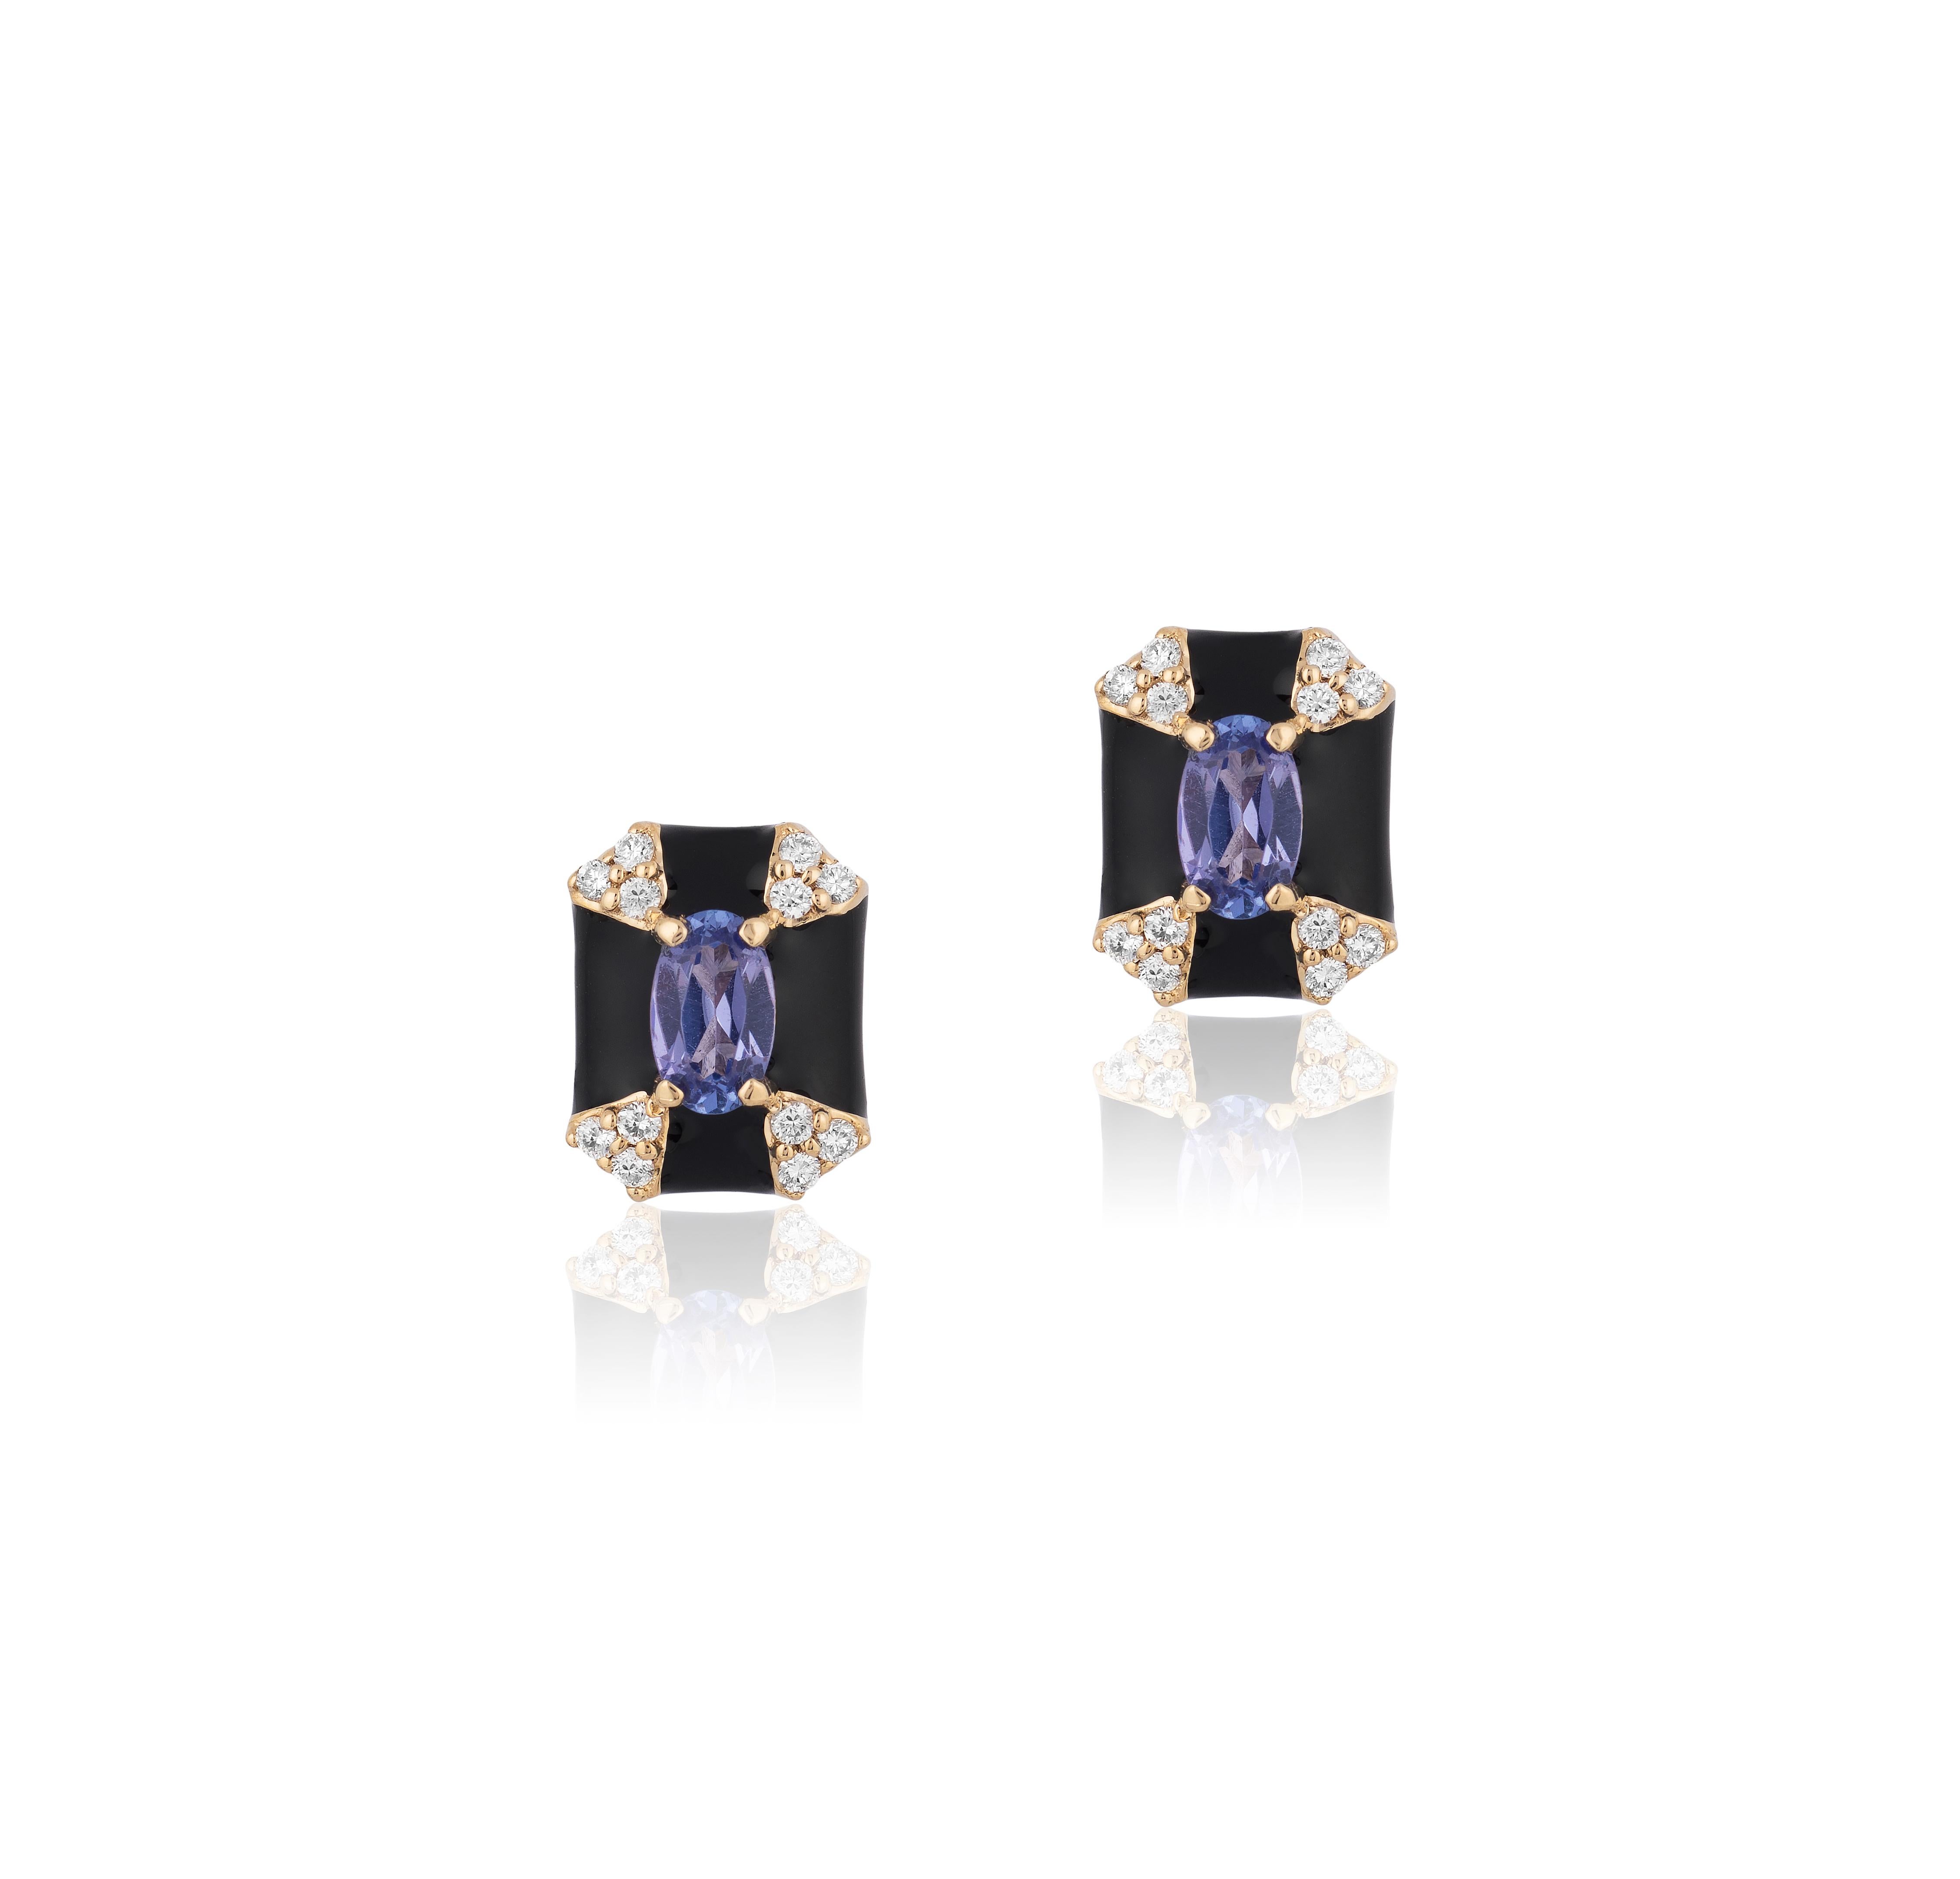 'Queen' Octagon Black Enamel Stud Earrings with Sapphire and Diamonds in 18K Yellow Gold.
Stone Size: 4 mm
Gemstone Approx. Wt: Sapphire- 0.62 Carats 
Diamonds: G-H / VS, Approx. Wt: 0.14 Carats
